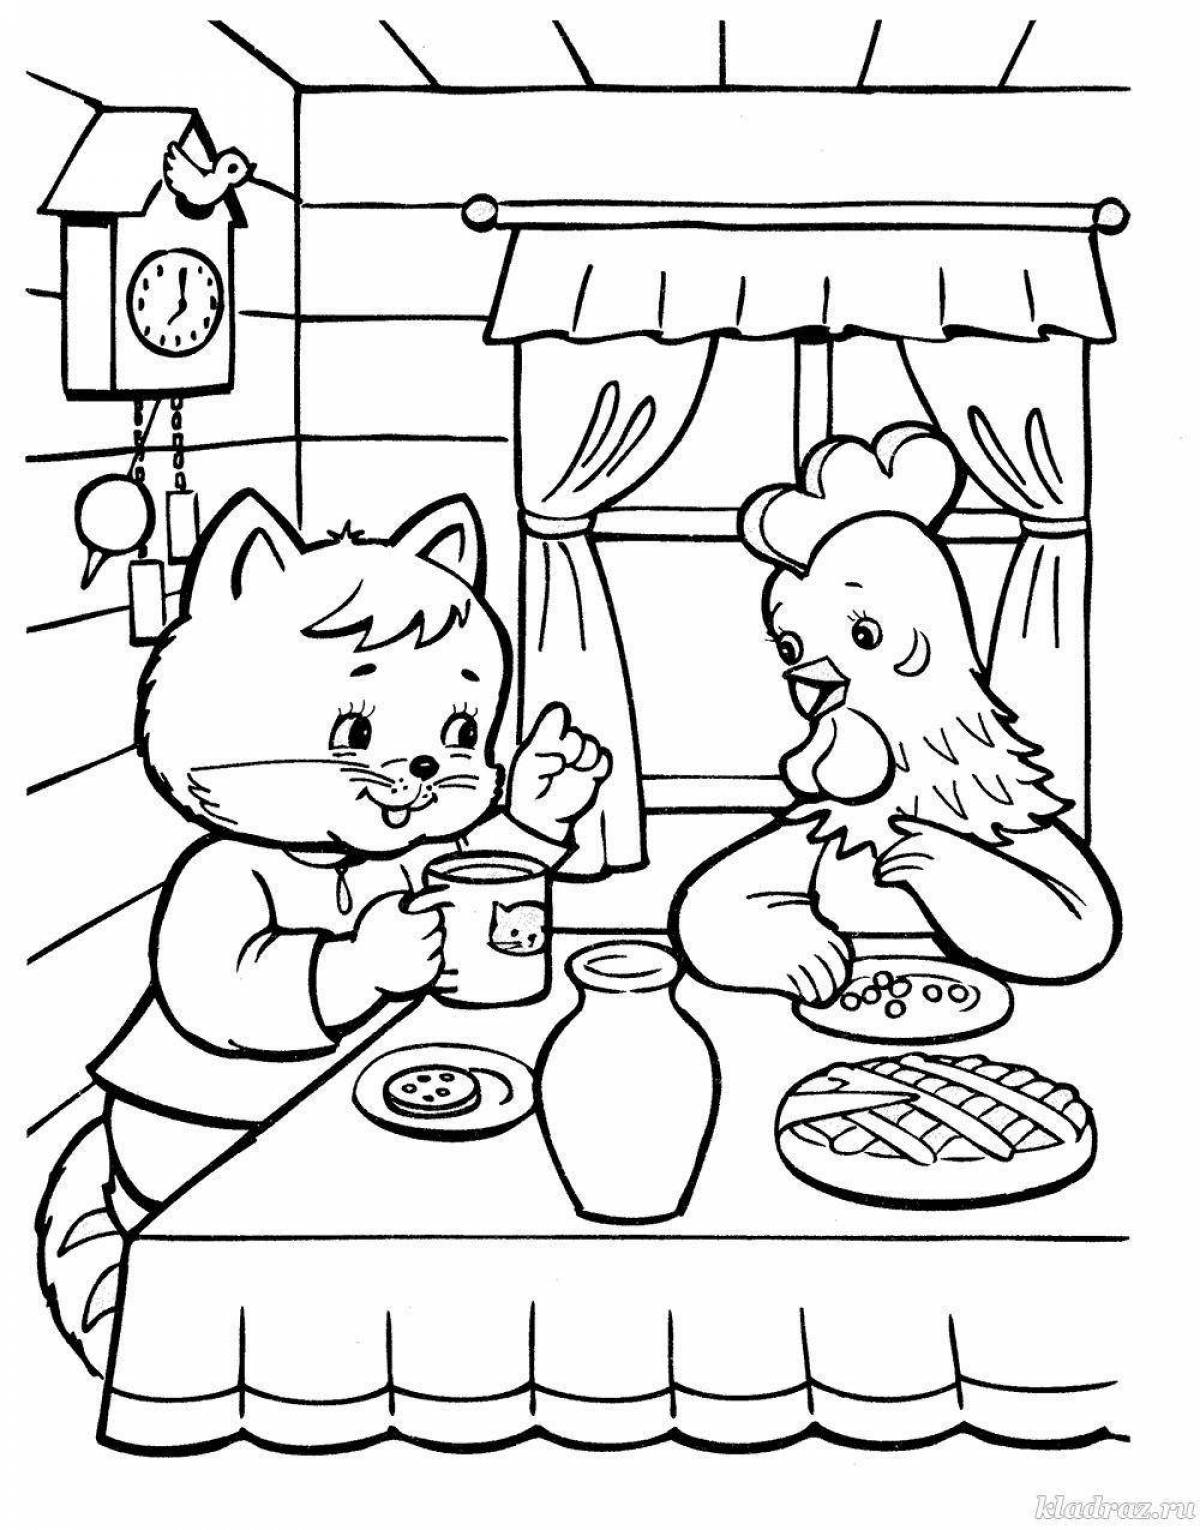 Coloring book bright cat and rooster